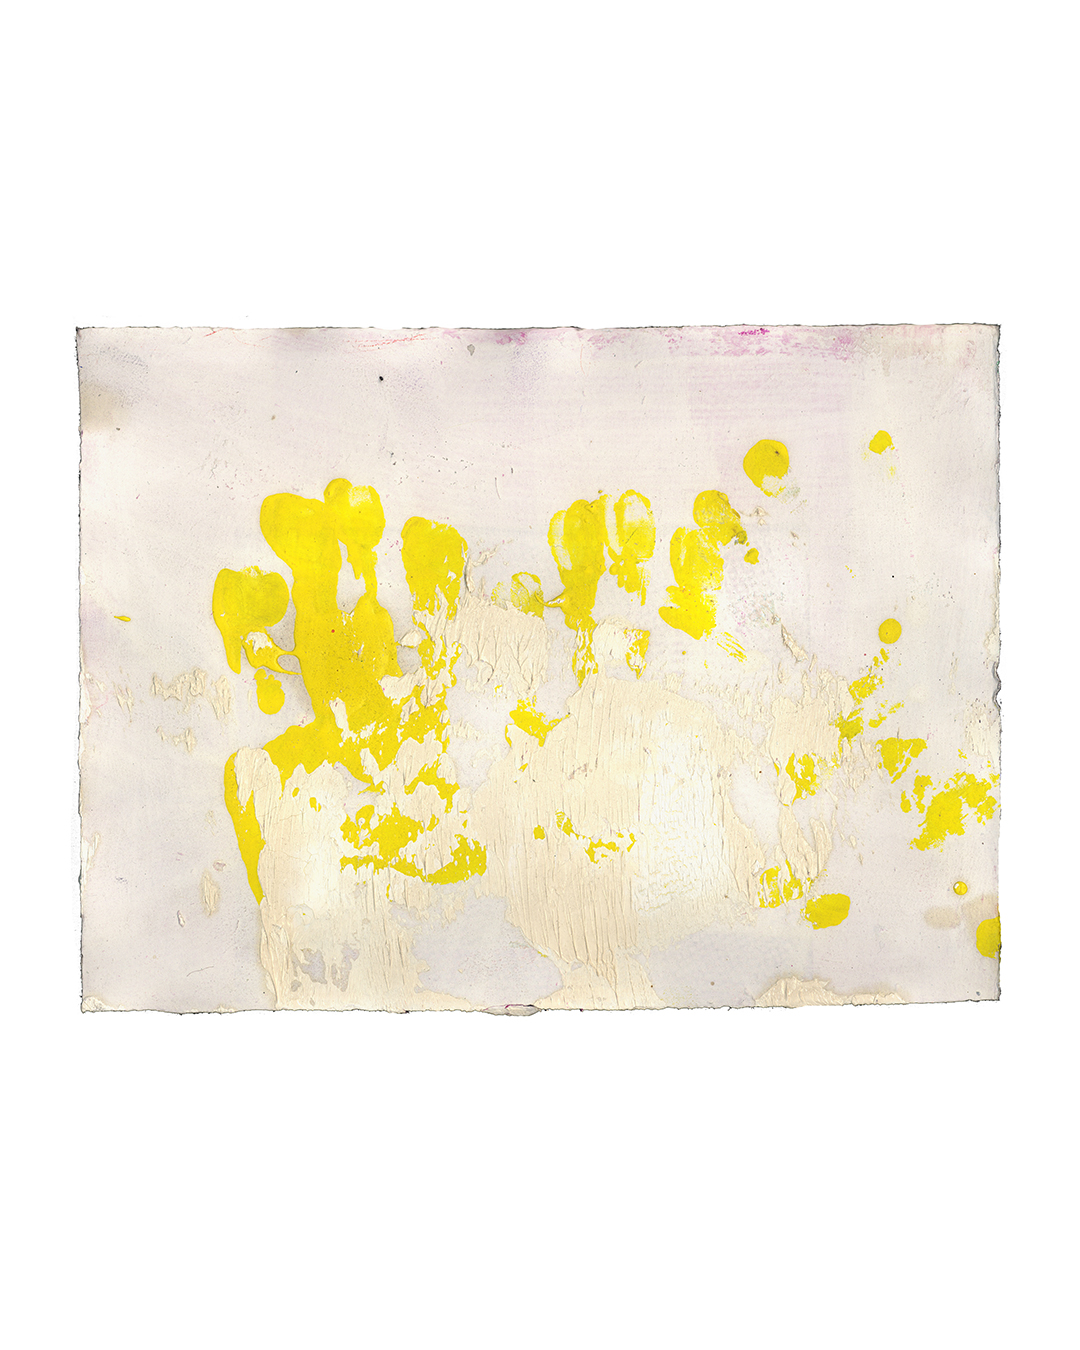 Piet Dieleman, untitled, 2020, painting, oil, tempera paint on paper, 390 x 280 mm, €930